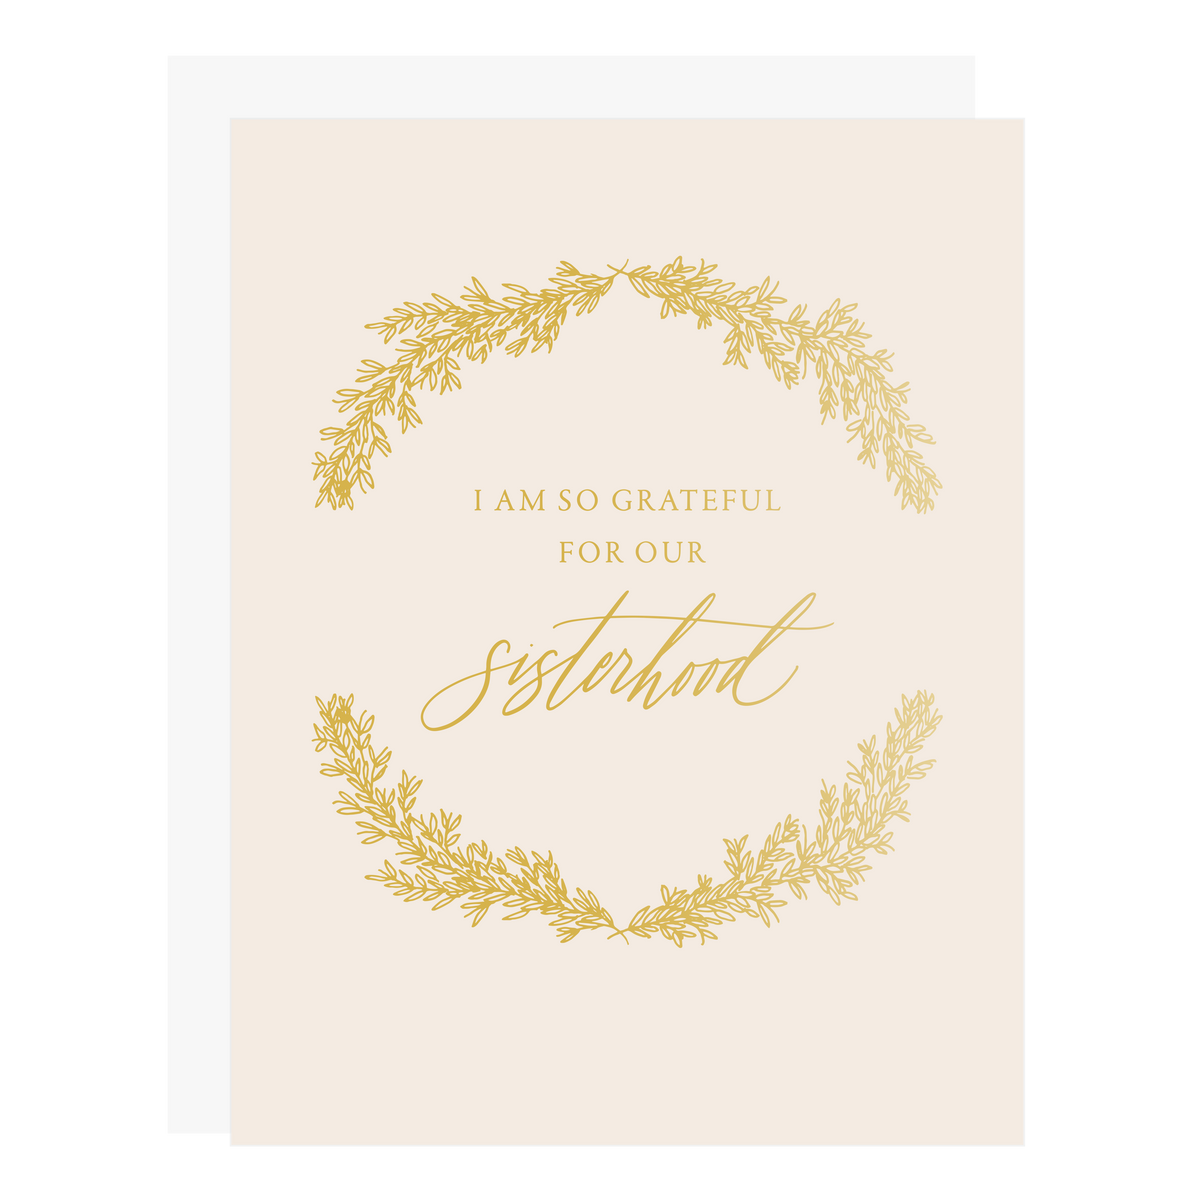 &quot;Our Sisterhood&quot; card, letterpress printed by hand in gold foil. 